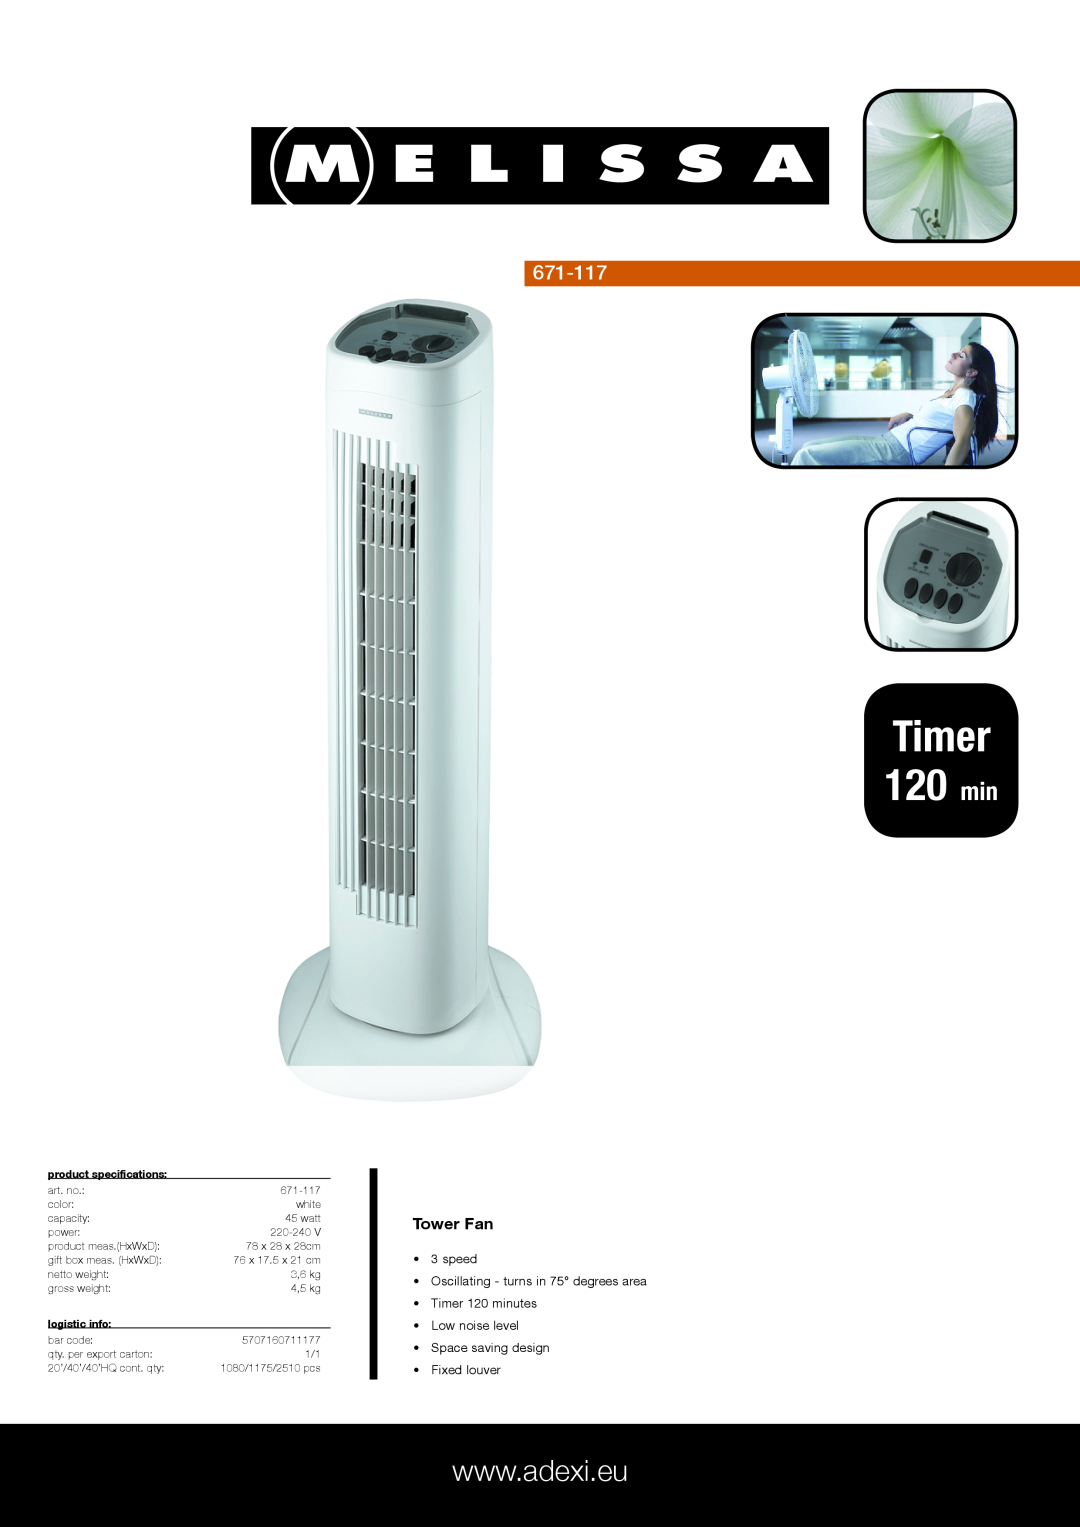 Melissa 671-117 specifications Timer 120 min, Tower Fan, speed Oscillating - turns in 75 degrees area, logistic info 